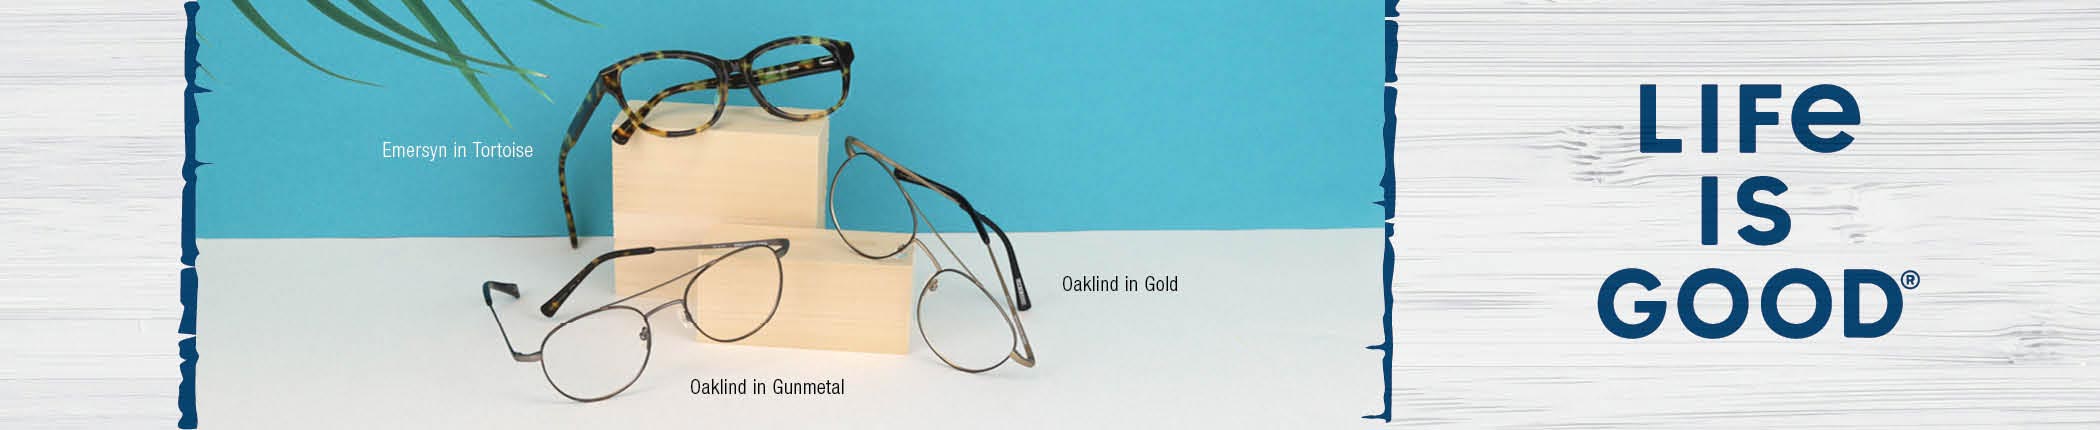 Shop Life is Good Eyeglasses - featuring Oaklind and Emersyn